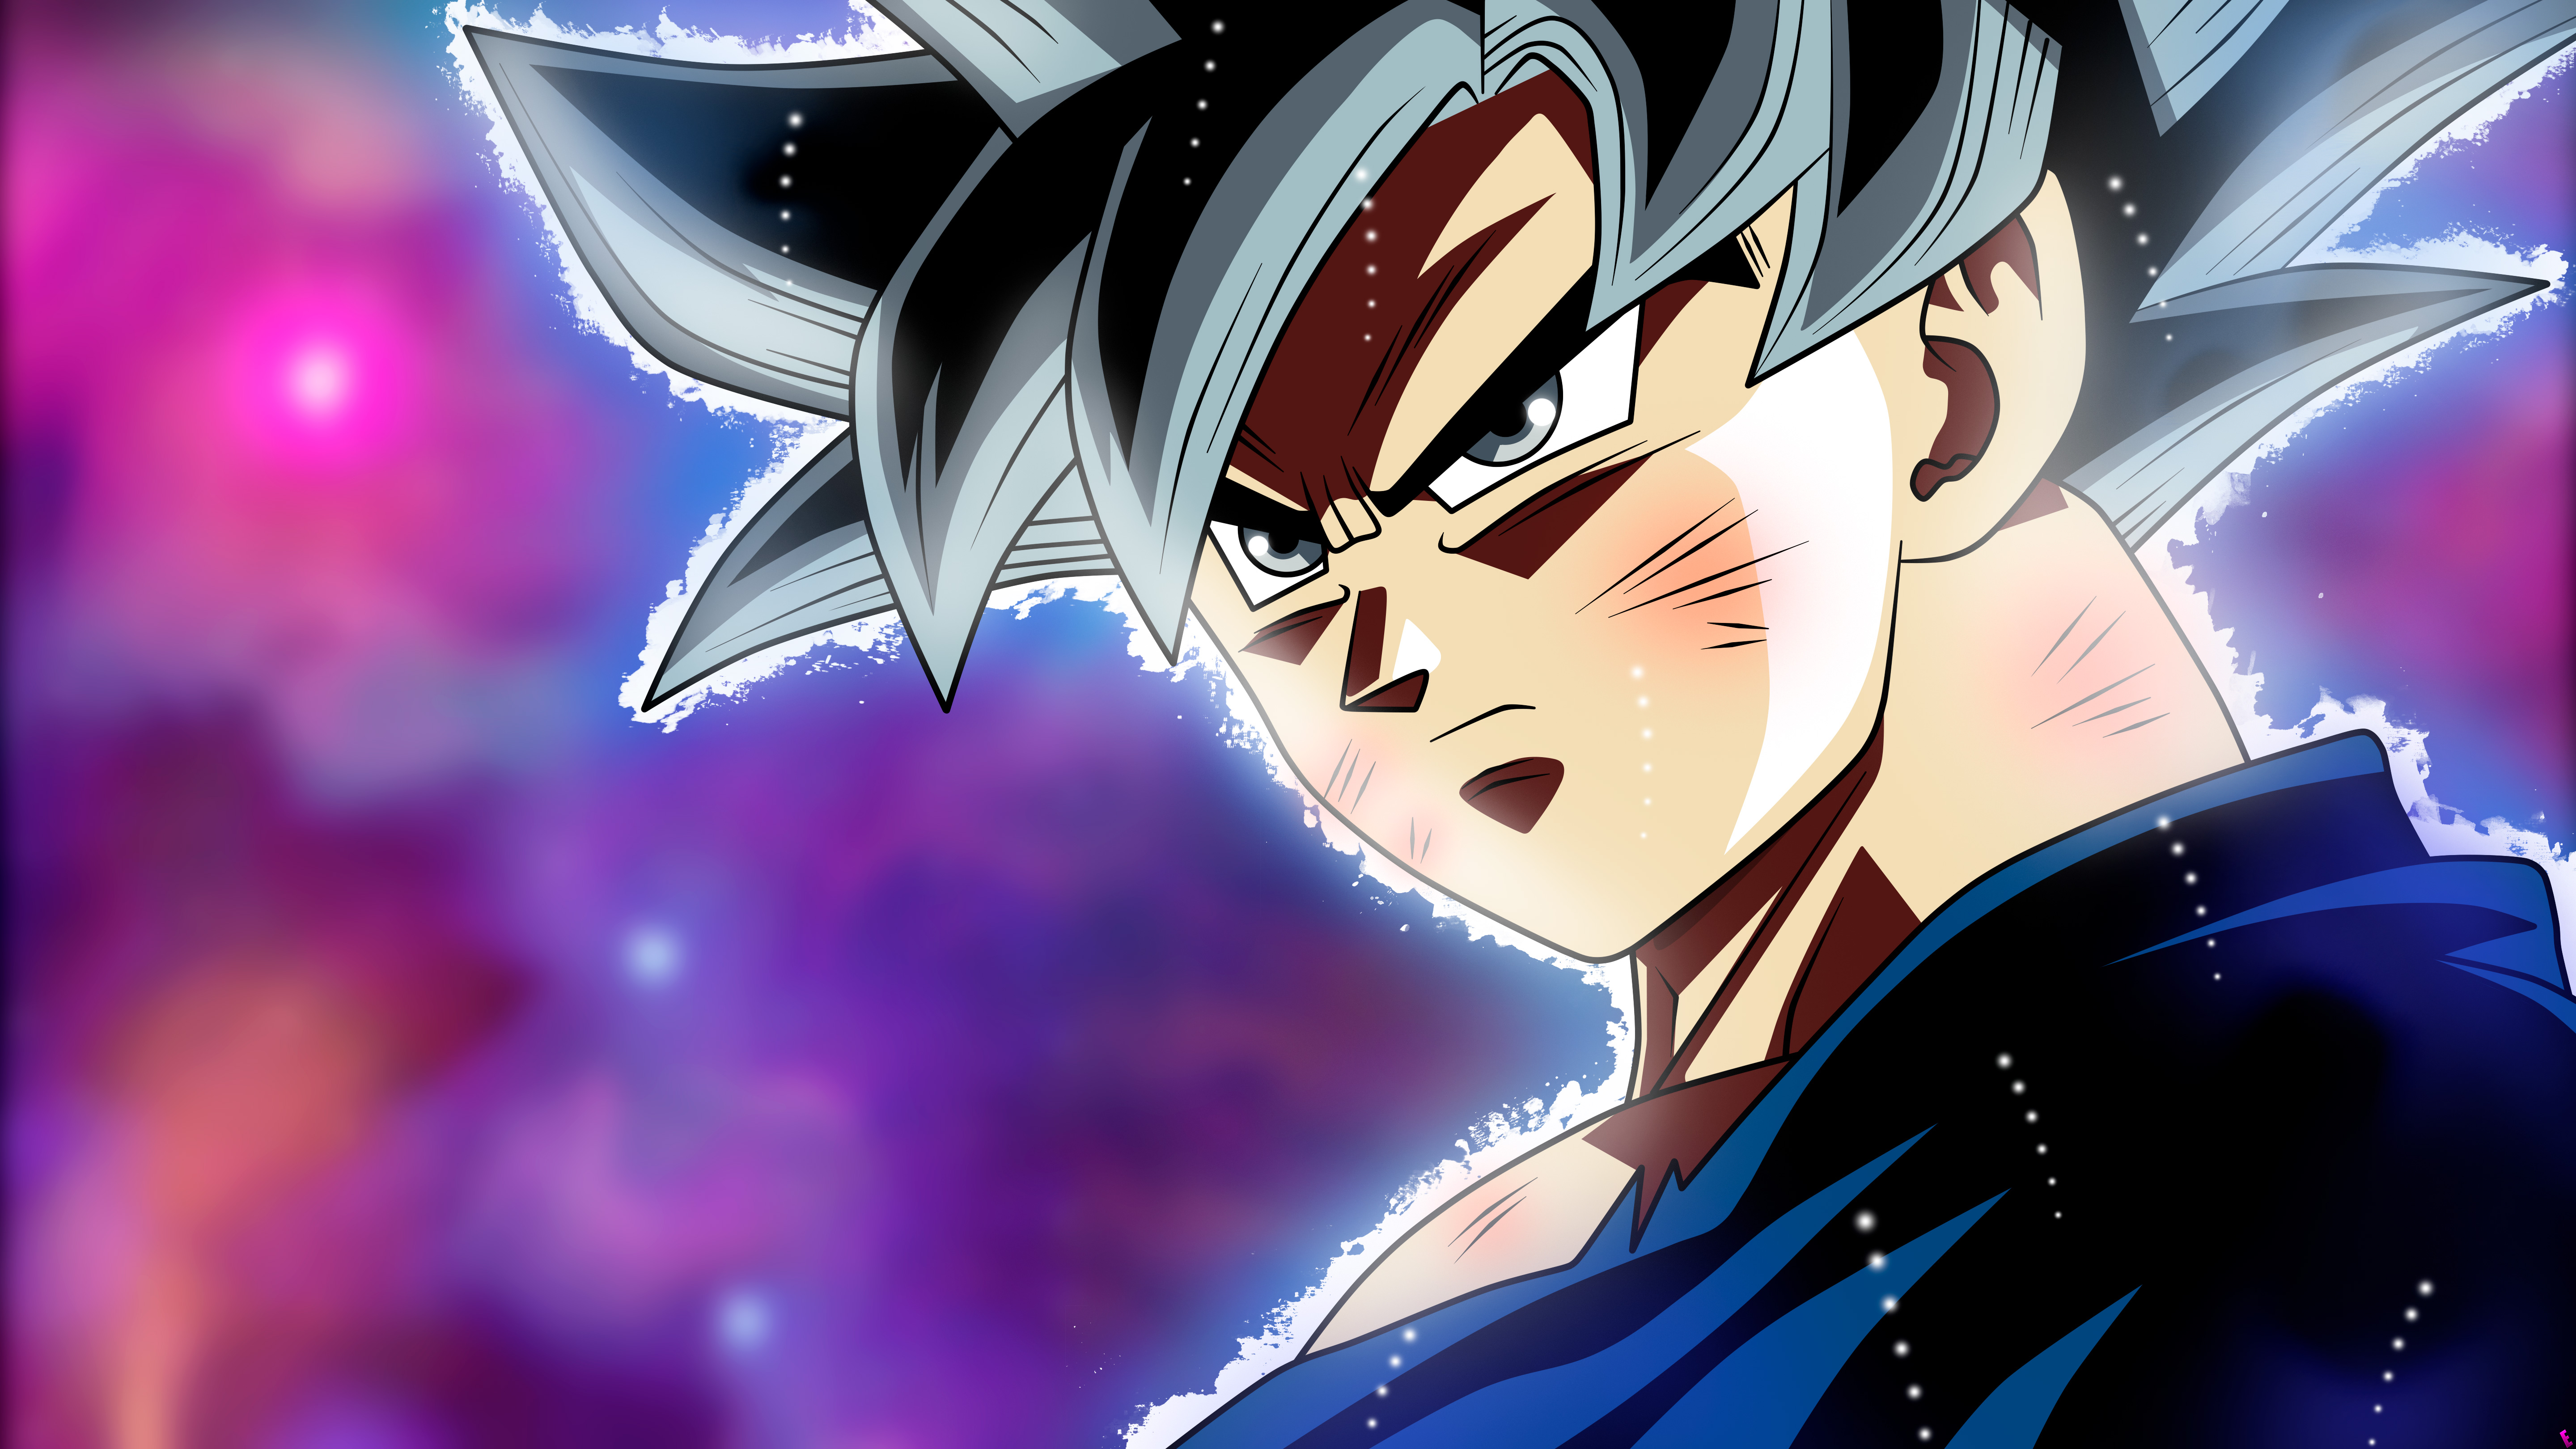 Dragon Ball Super Goku 5k Wallpaper, 1024x768 Resolution HD 4k Wallpaper, Image, Background, Photos and Picture